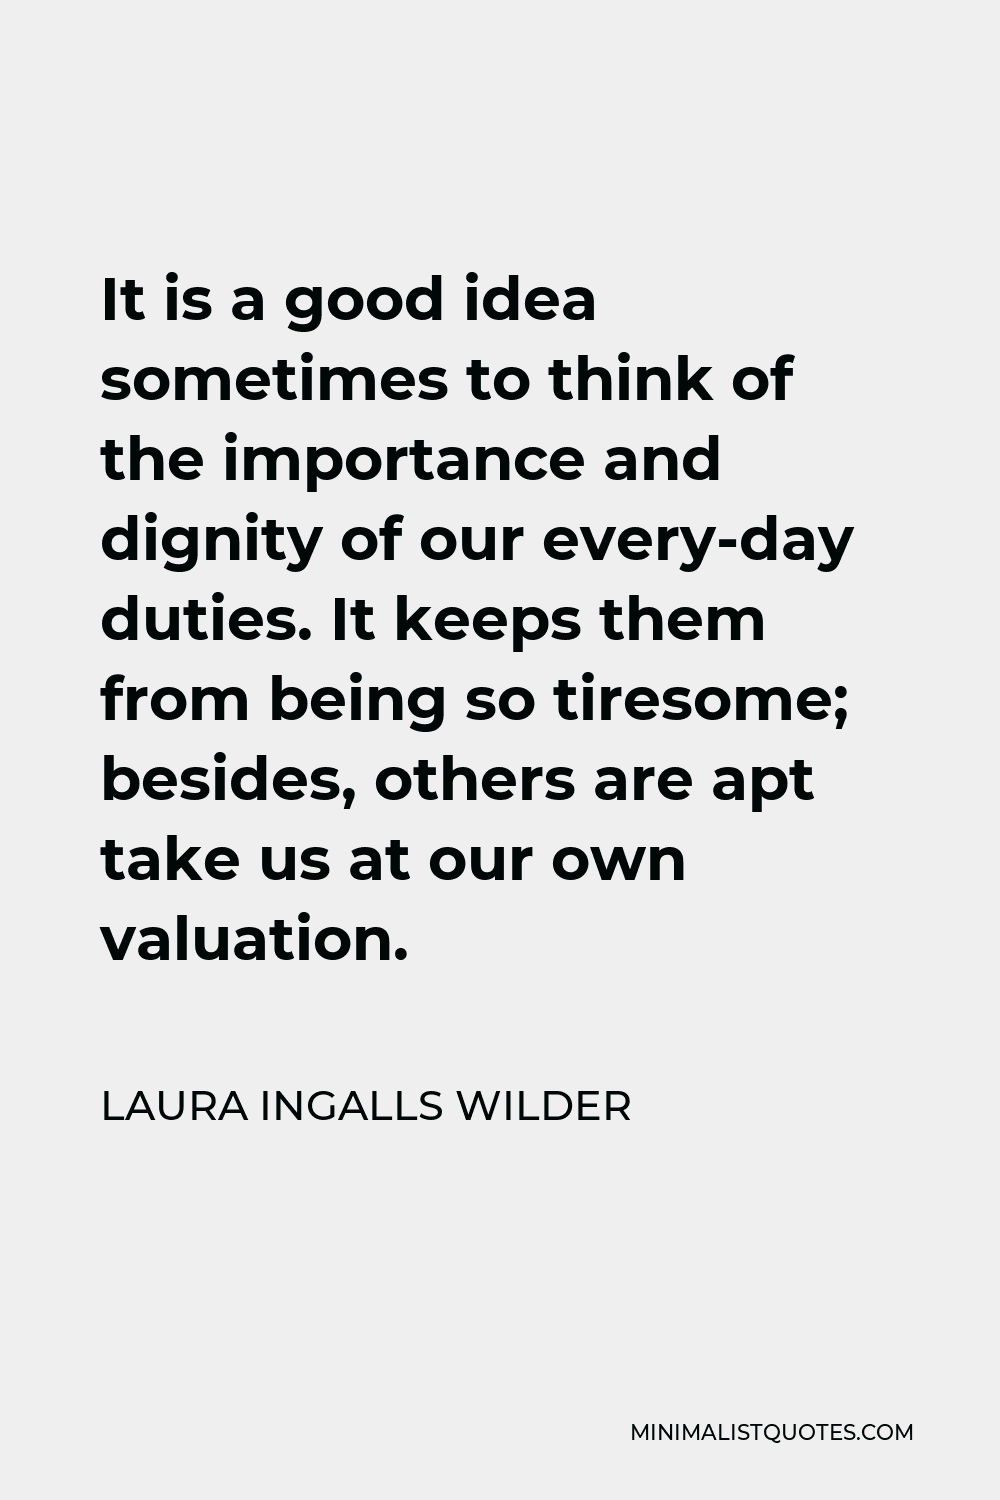 Laura Ingalls Wilder Quote - It is a good idea sometimes to think of the importance and dignity of our every-day duties. It keeps them from being so tiresome; besides, others are apt take us at our own valuation.